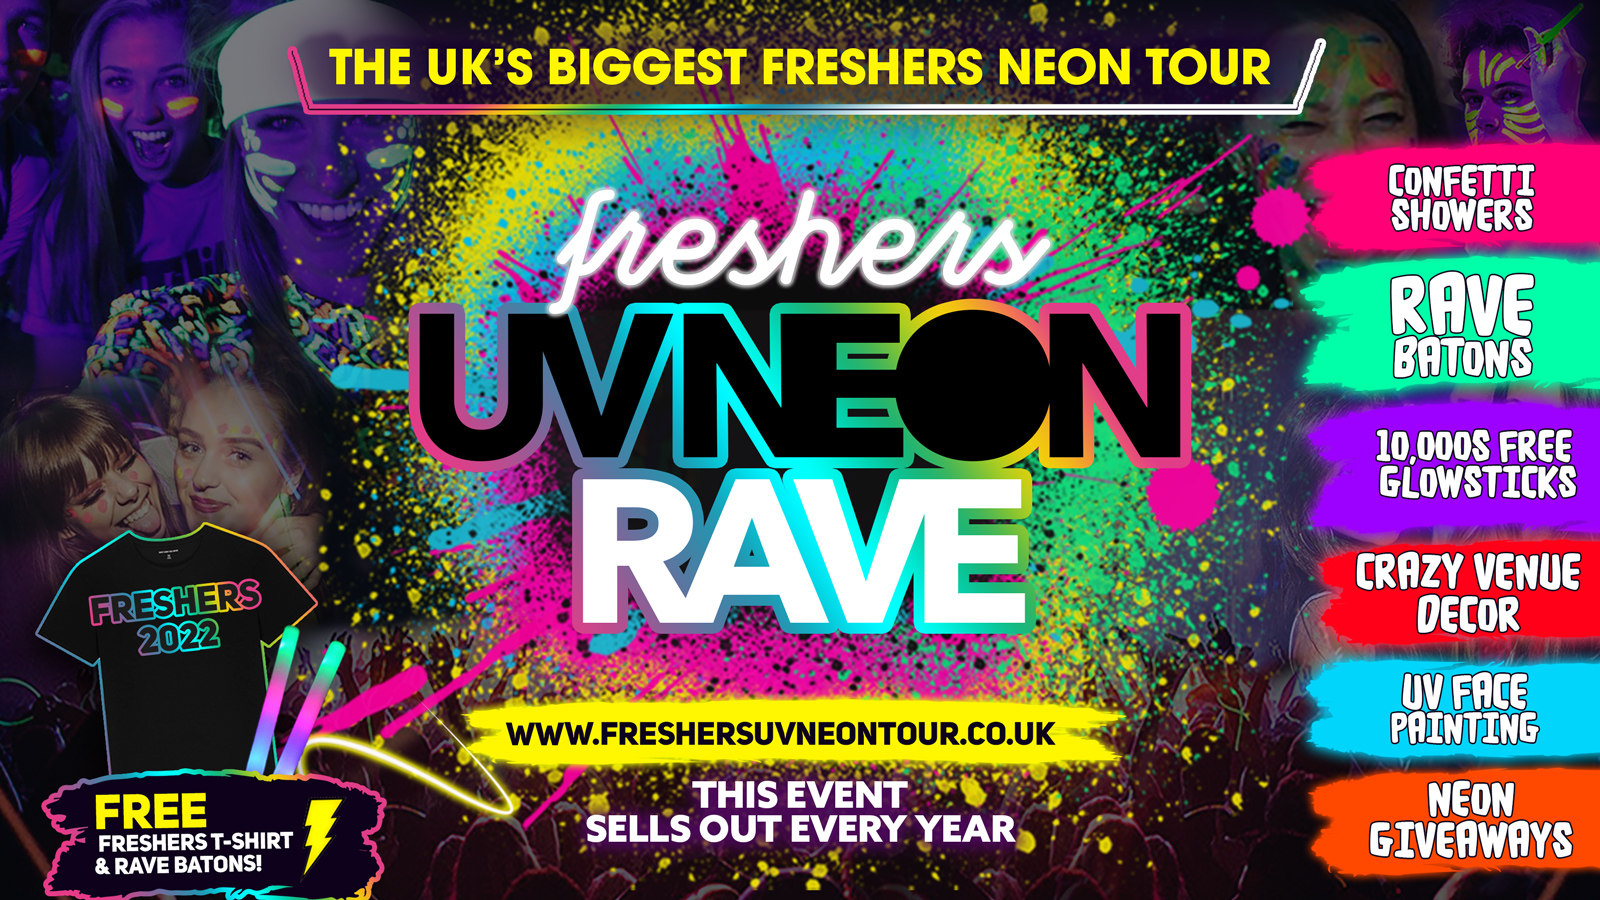 PORTSMOUTH FRESHERS UV NEON RAVE | THE OFFICIAL | Portsmouth Freshers 2022